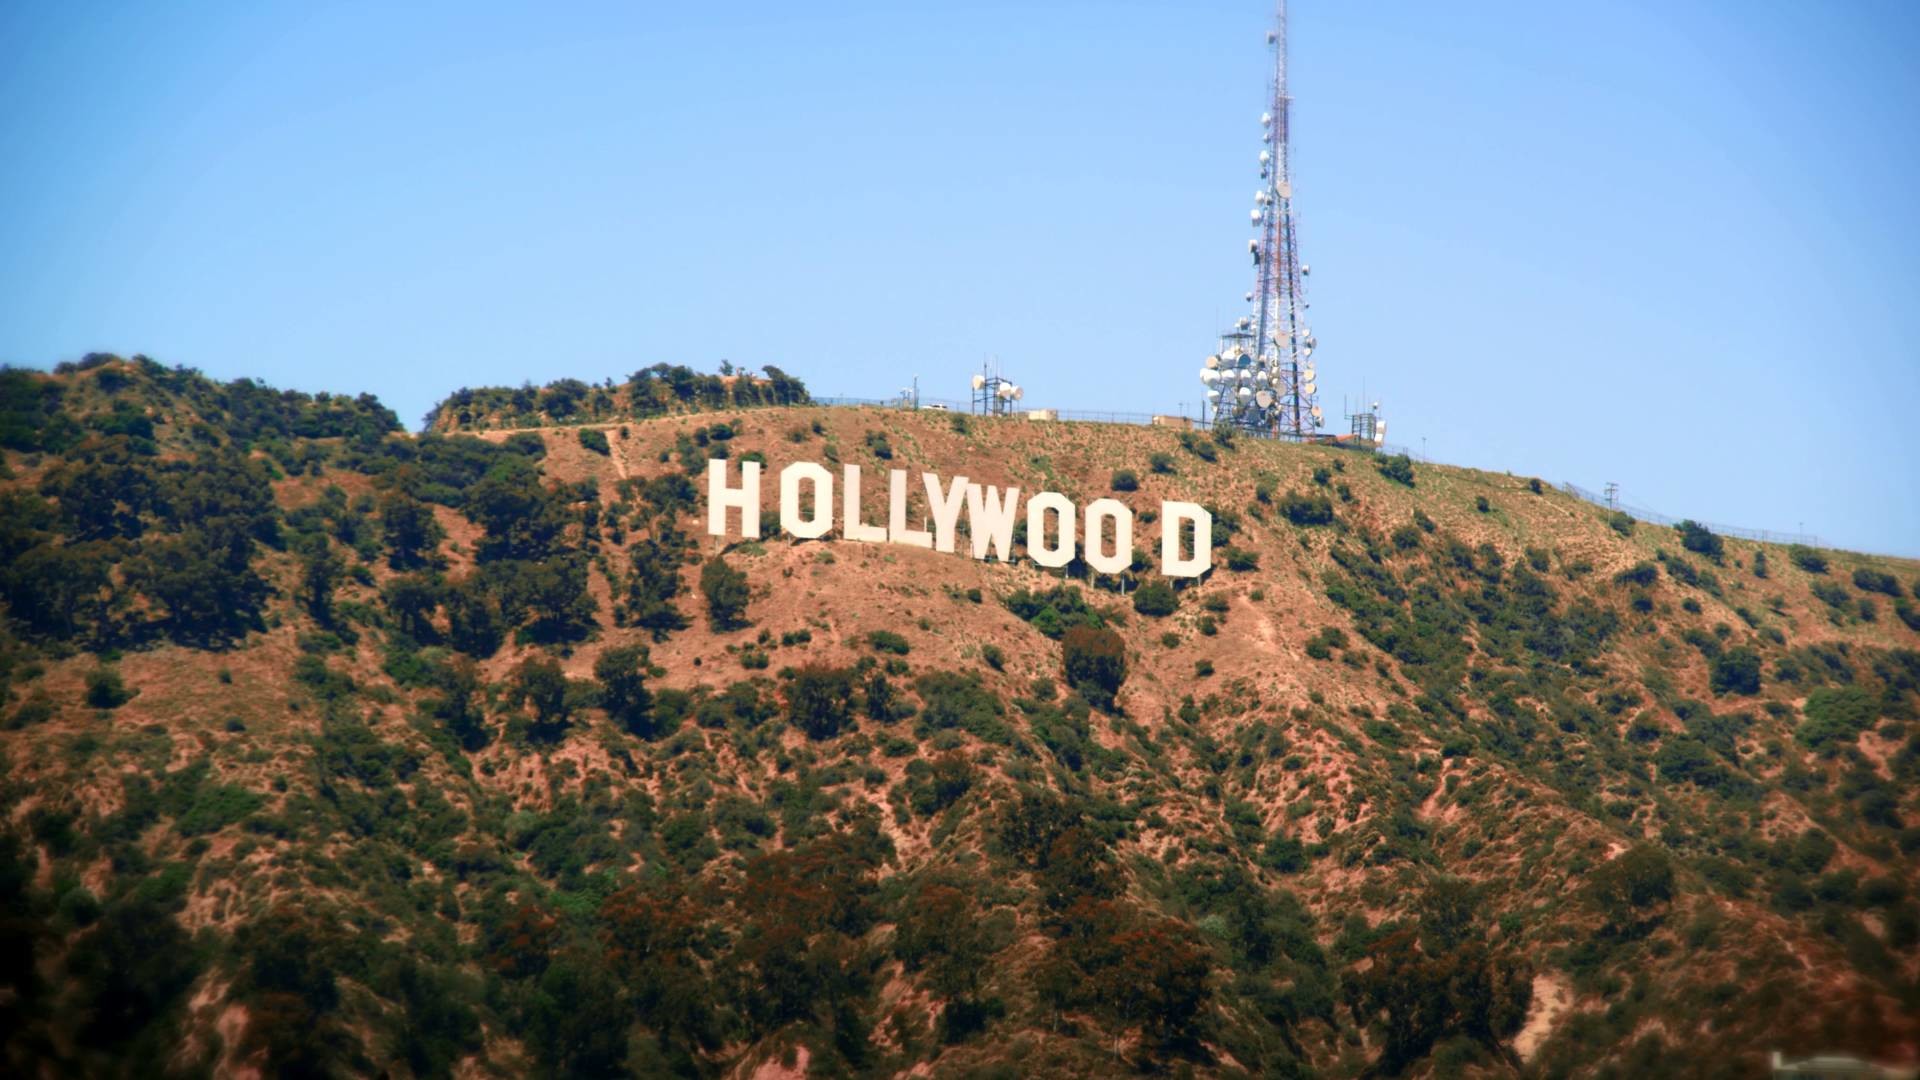 1920x1080 Hollywood Sign Wallpaper